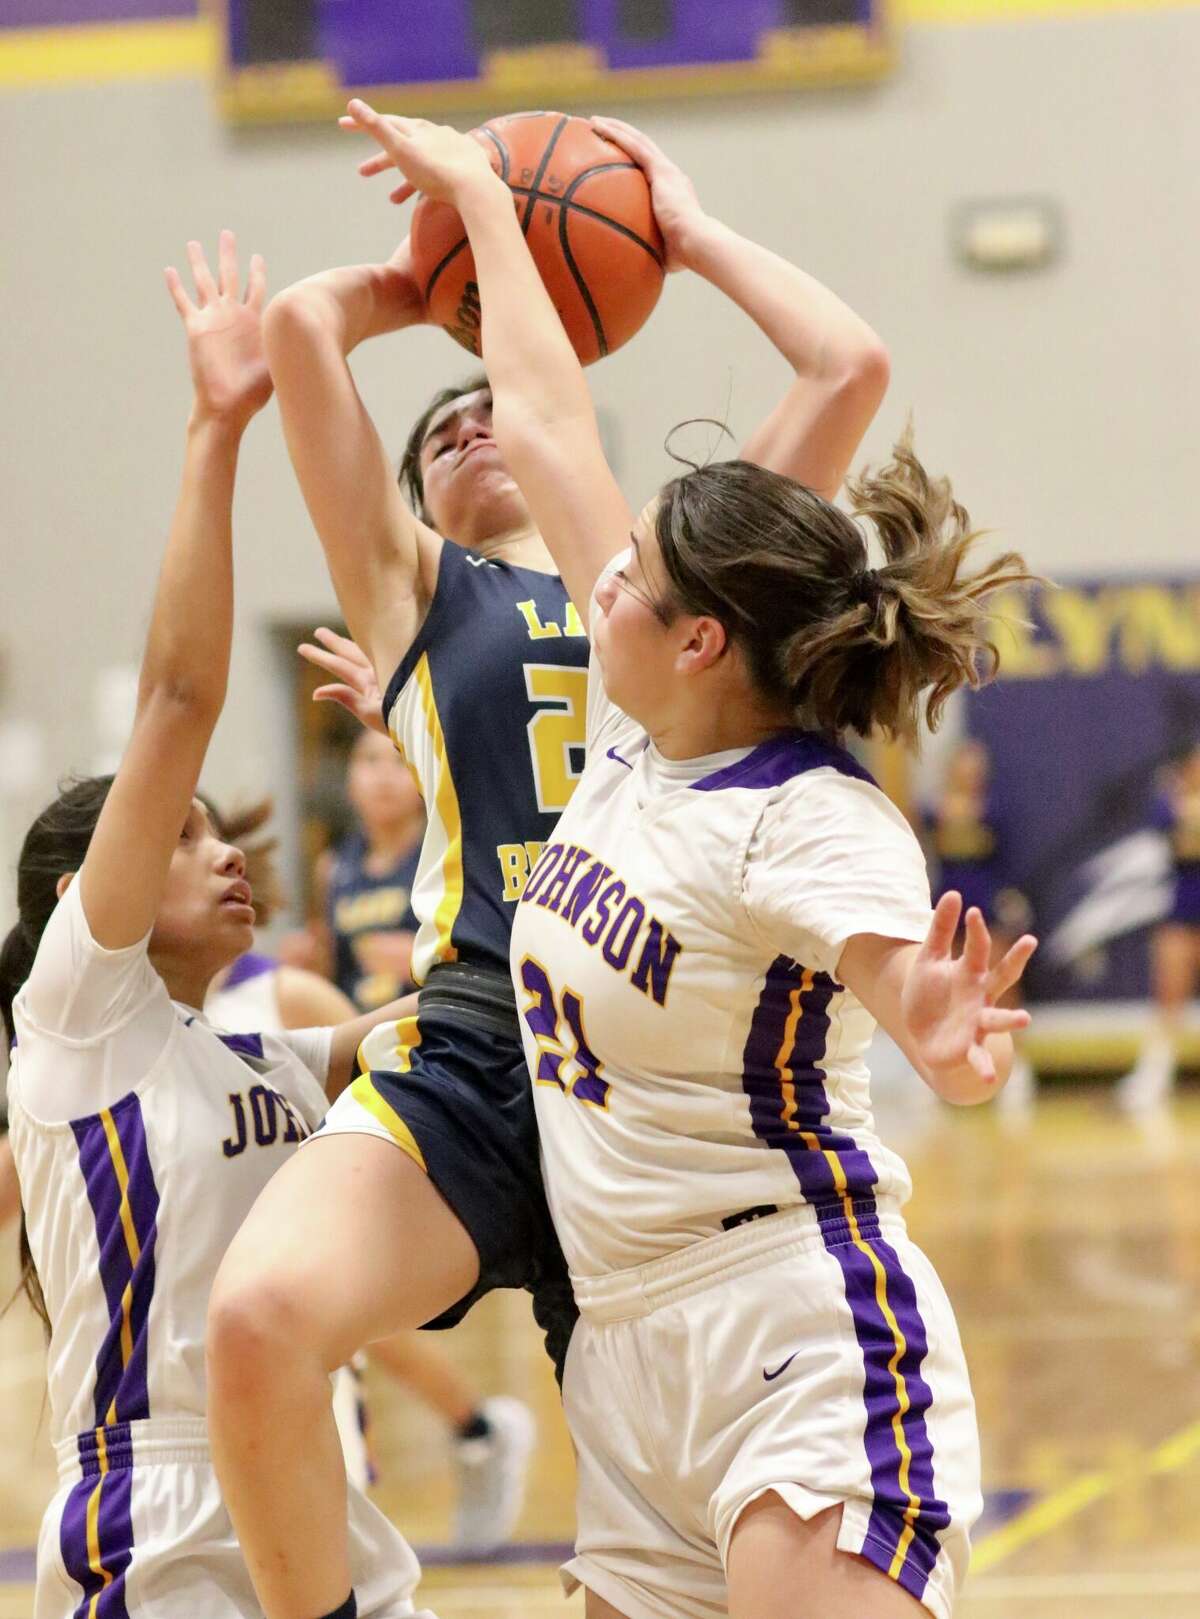 The Alexander Lady Bulldogs beat the LBJ Lady Wolves in double overtime on Friday.